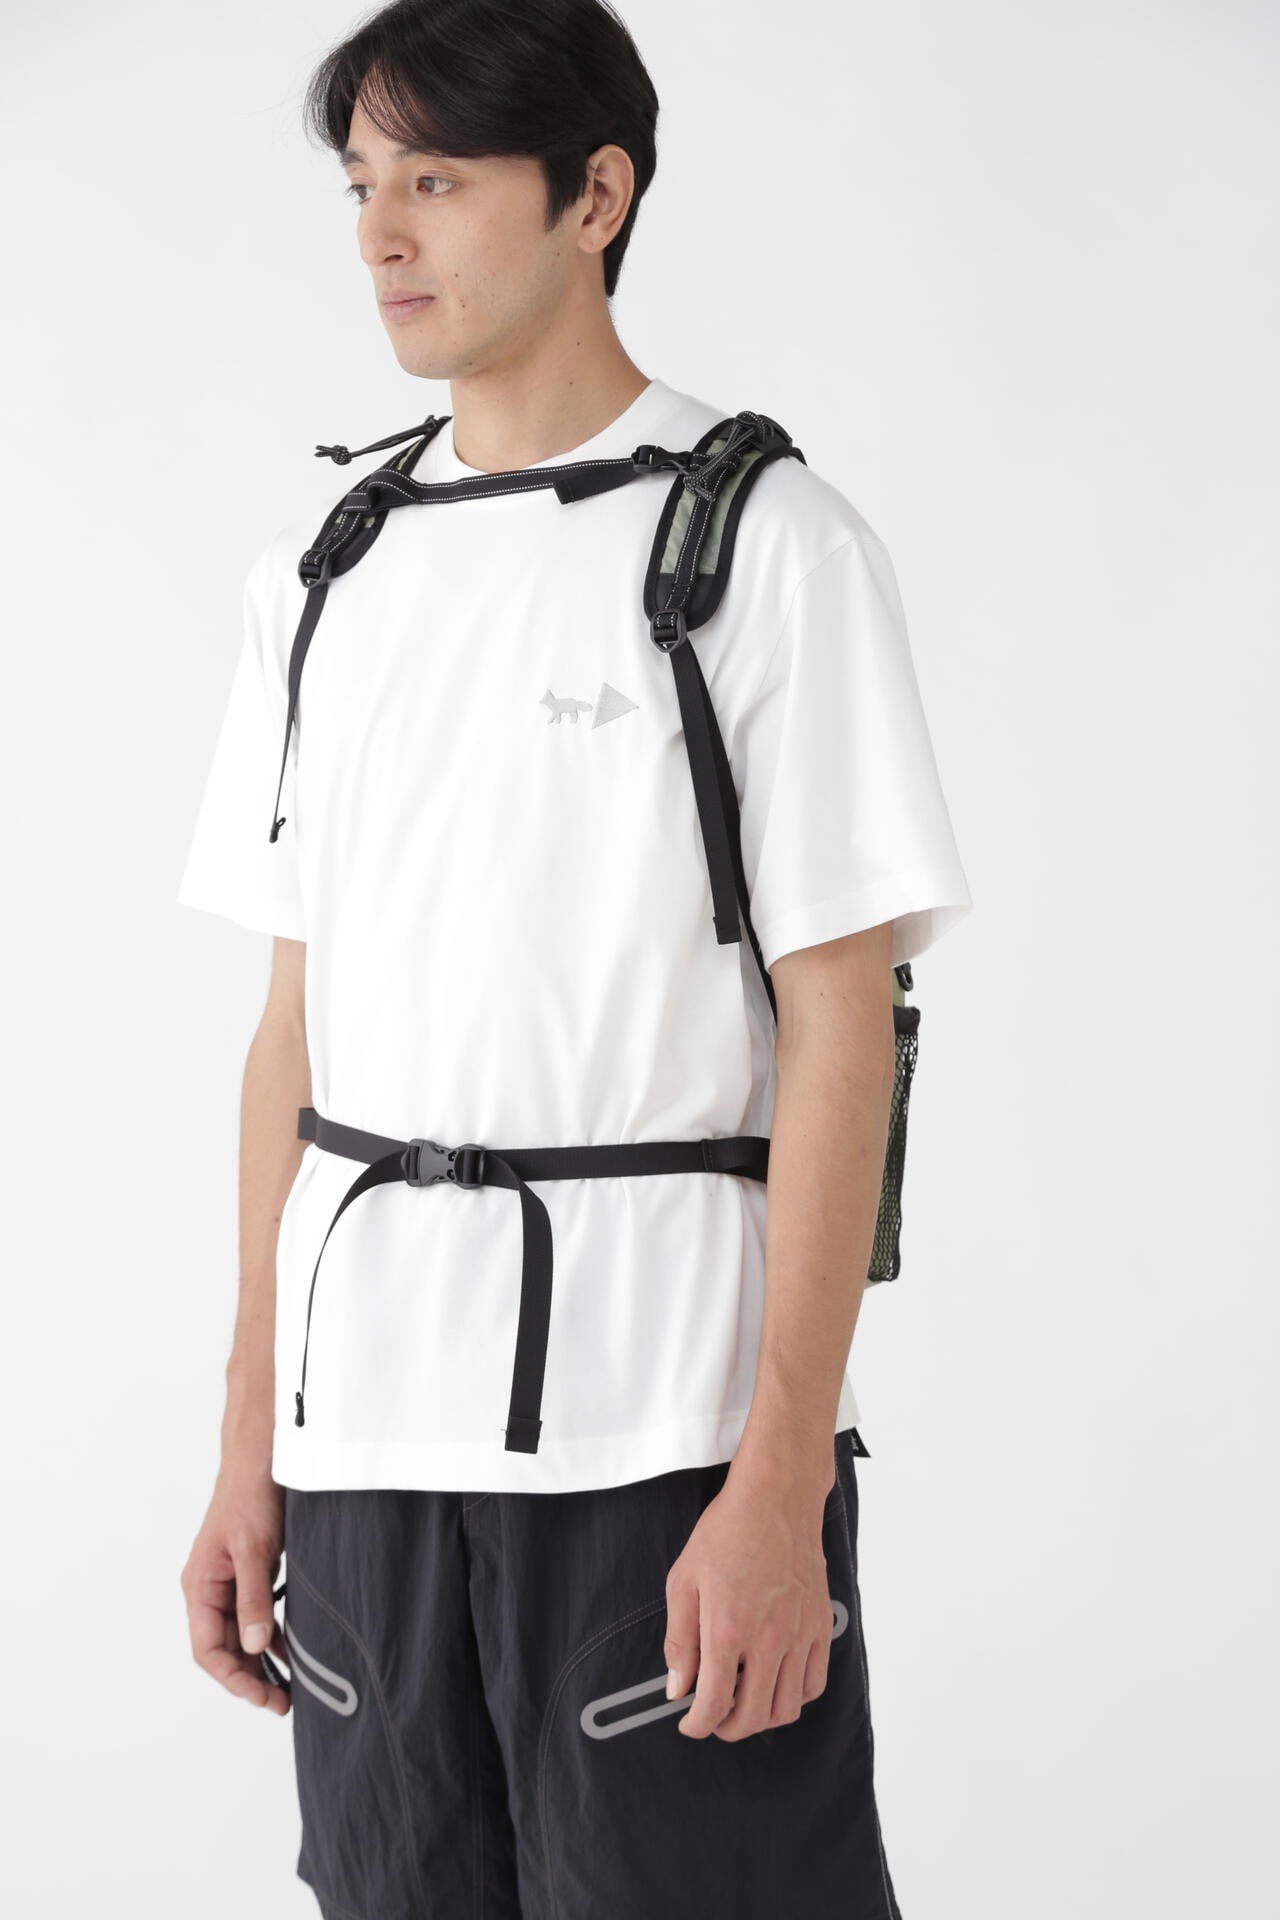 MAISON KITSUNÉ × and wander SIL NYLON 20L DAYPACK | backpack | and 